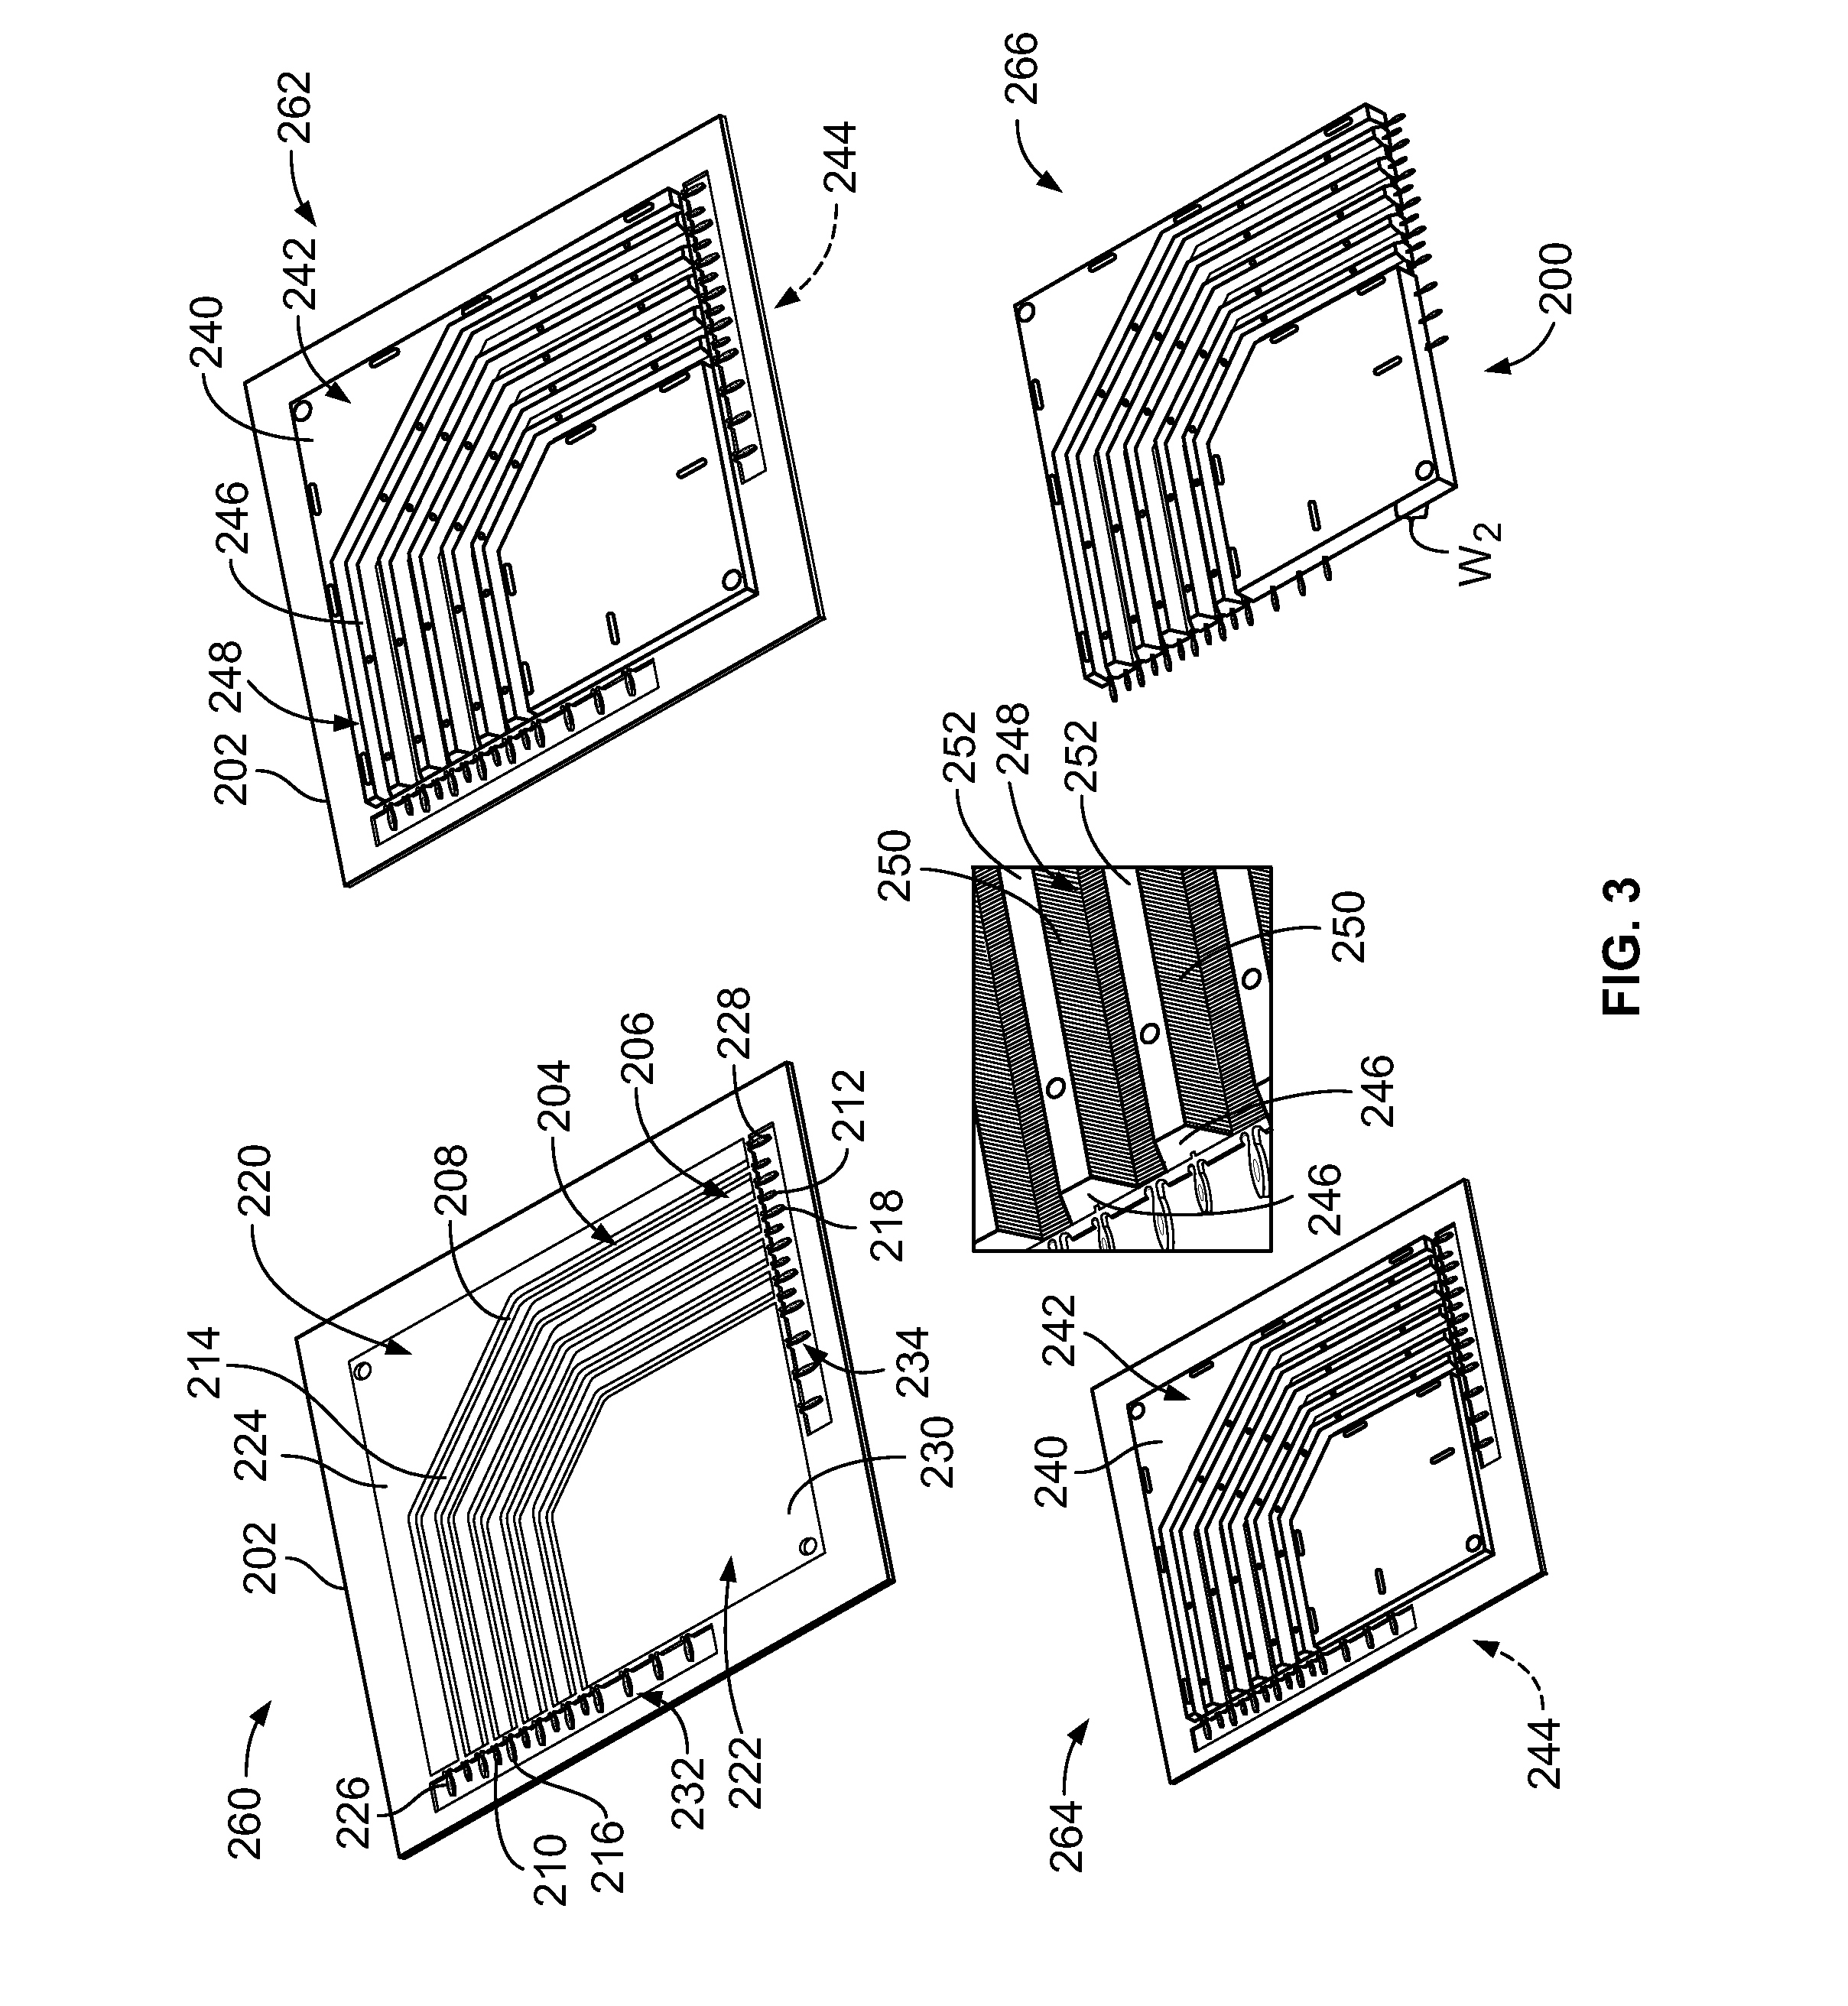 Electrical connector having shielded differential pairs